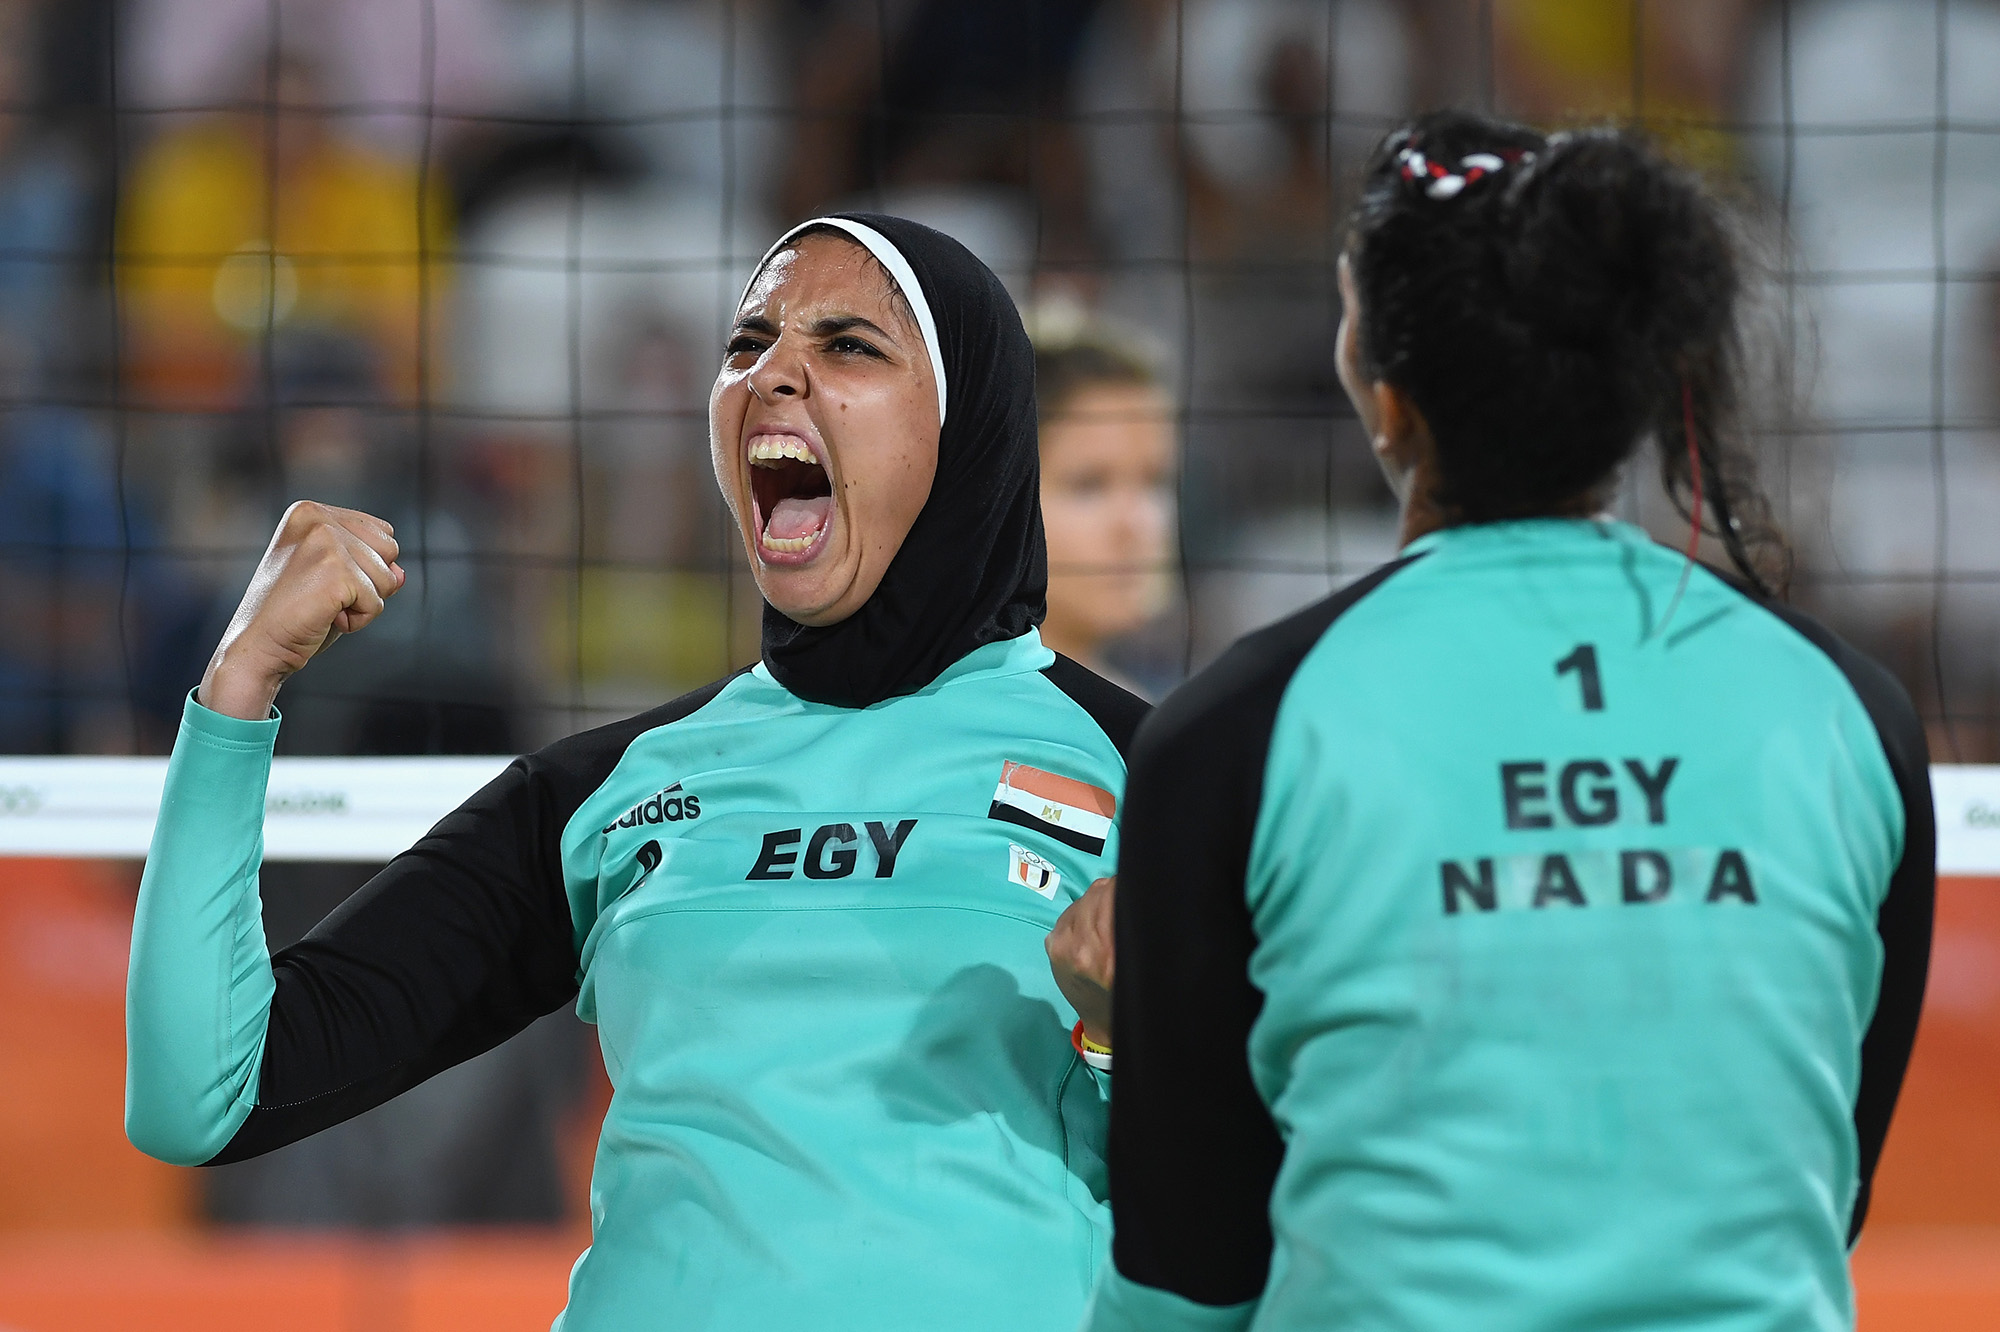 Doaa Elghobashy of Egypt reacts during the Women's Beach Volleyball preliminary round Pool D match against Laura Ludwig and Kira Walkenhorst of Germany on Day 2 of the Rio 2016 Olympic Games at the Beach Volleyball Arena on August 7, 2016 in Rio de Janeiro, Brazil.  (Photo by Shaun Botterill/Getty Images) (Shaun Botterill&mdash;Getty Images)